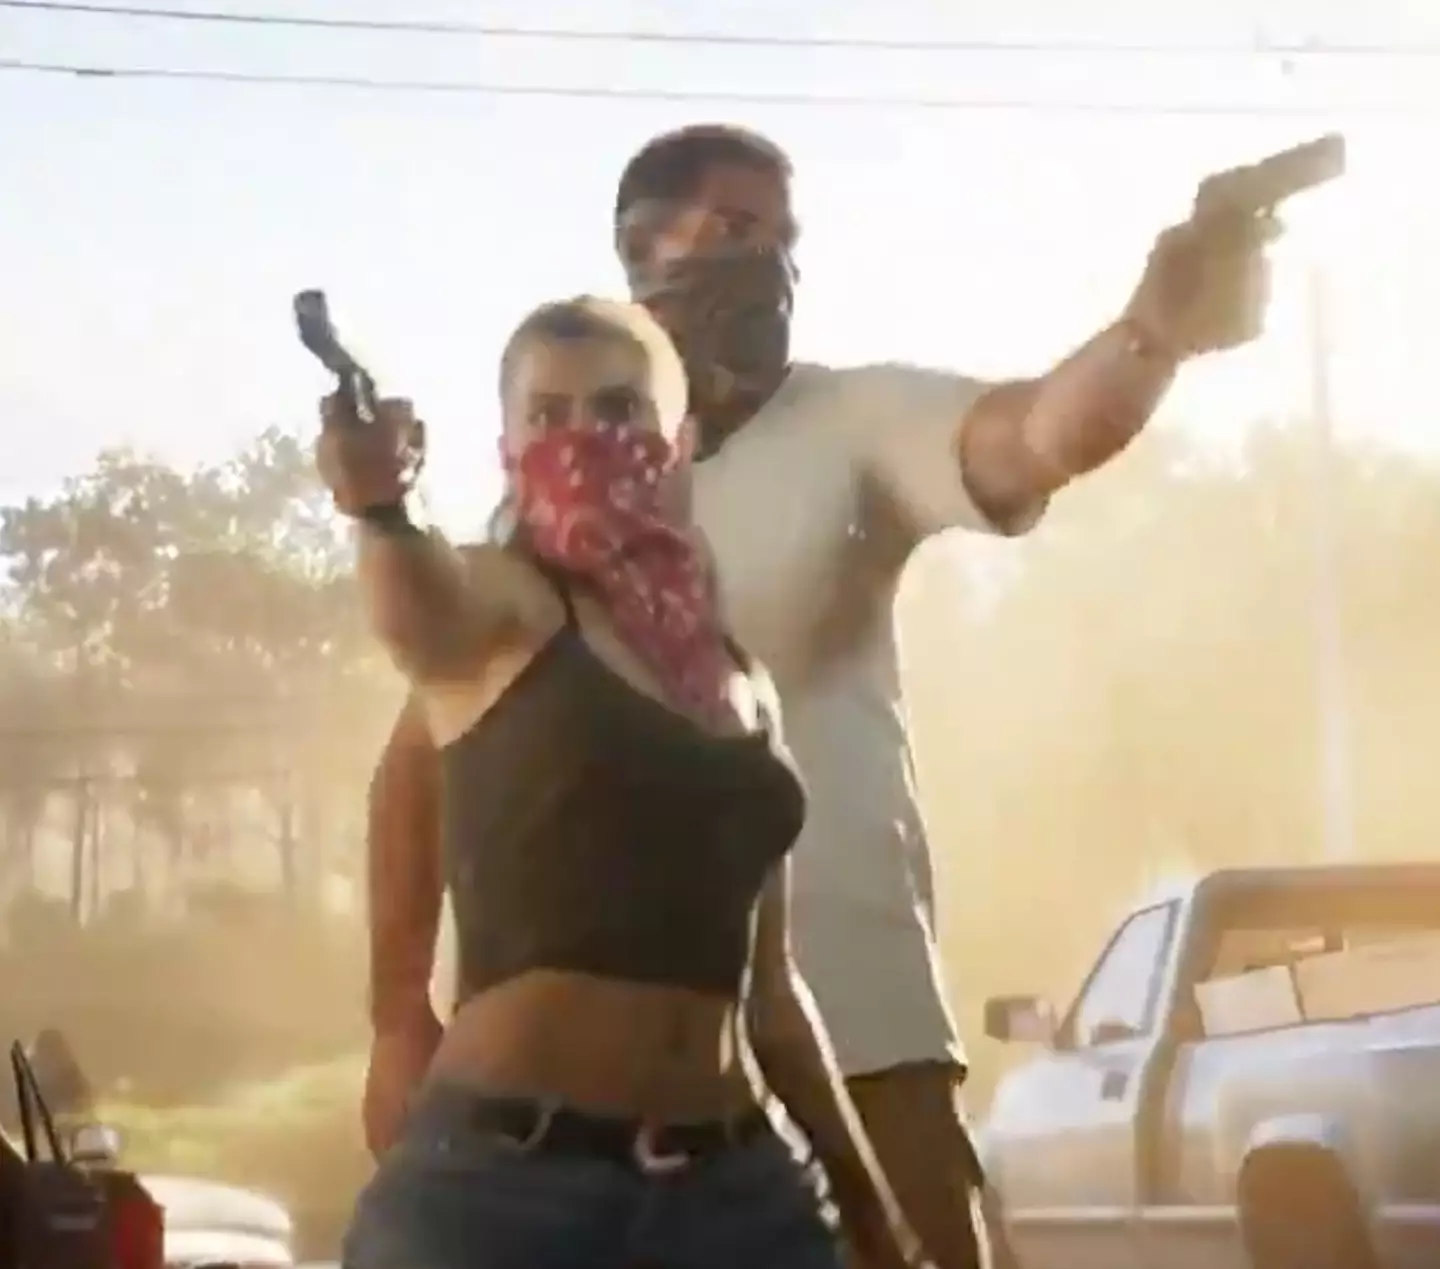 GTA 6 will centre on a Bonnie and Clyde partnership.